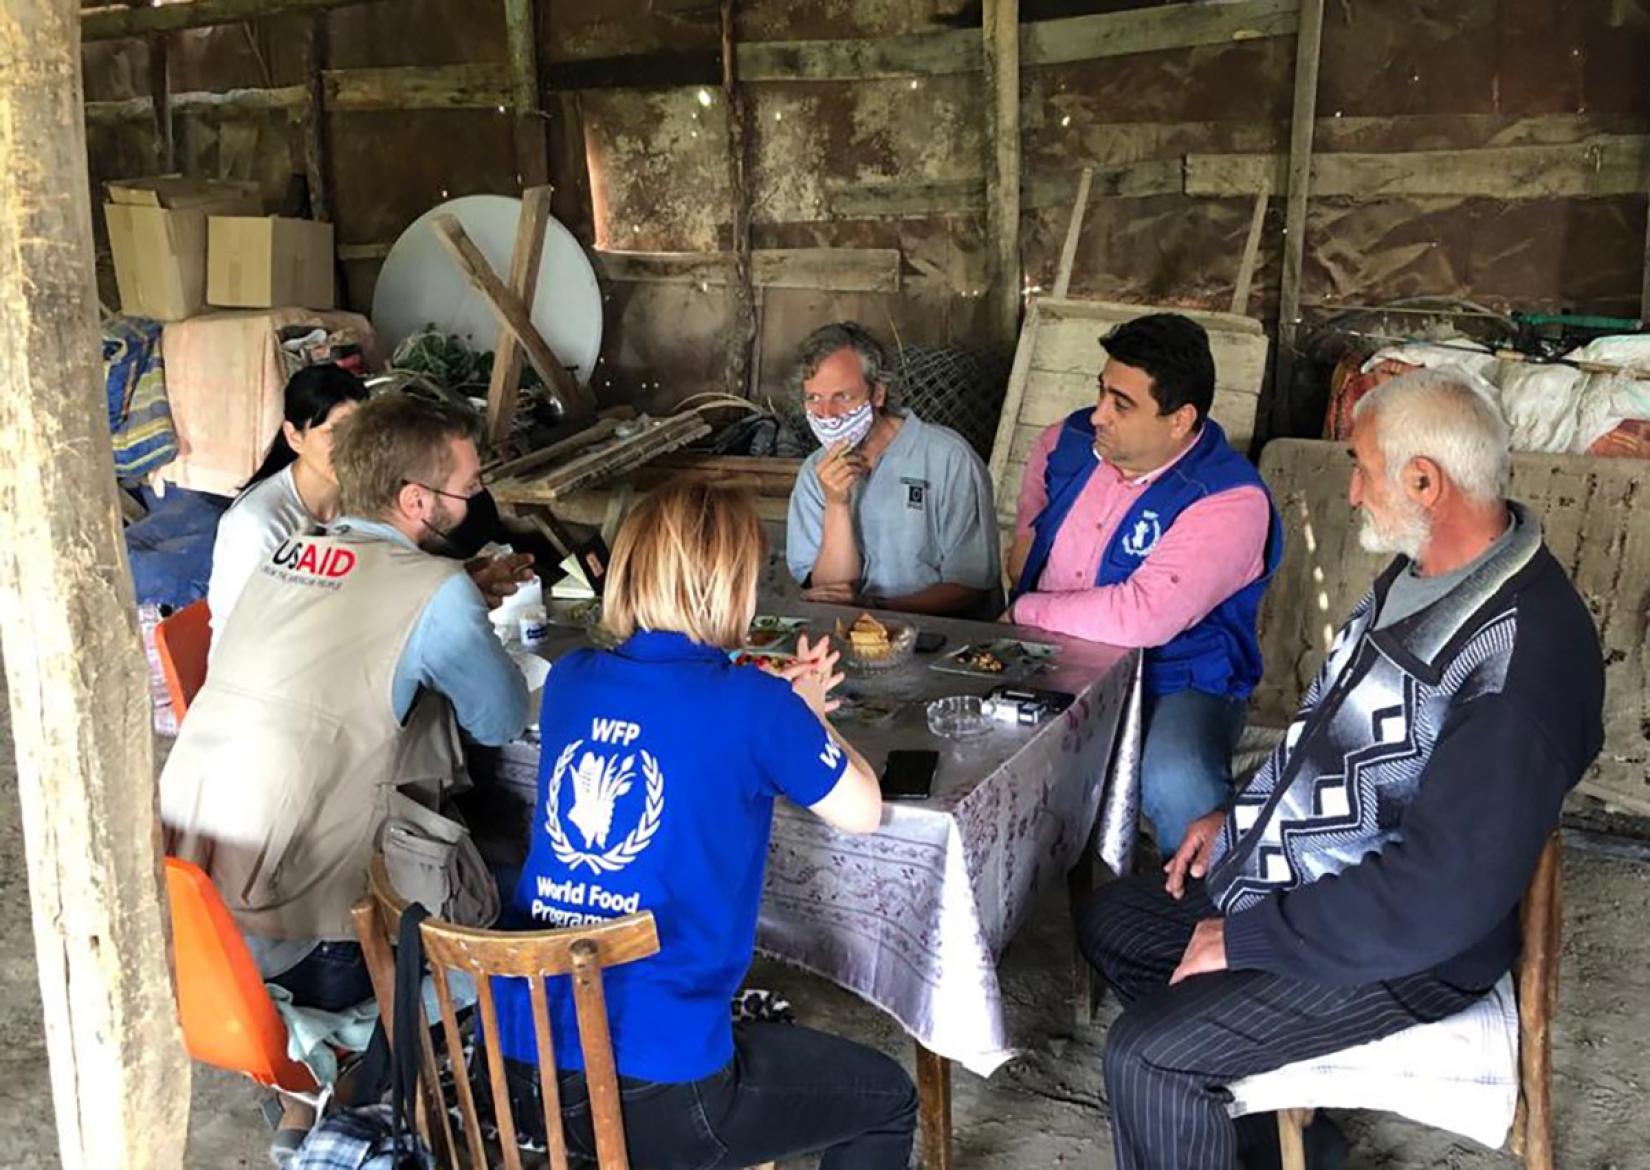 WFP, EU and USAID representatives' meeting with conflict-affected people and host families.